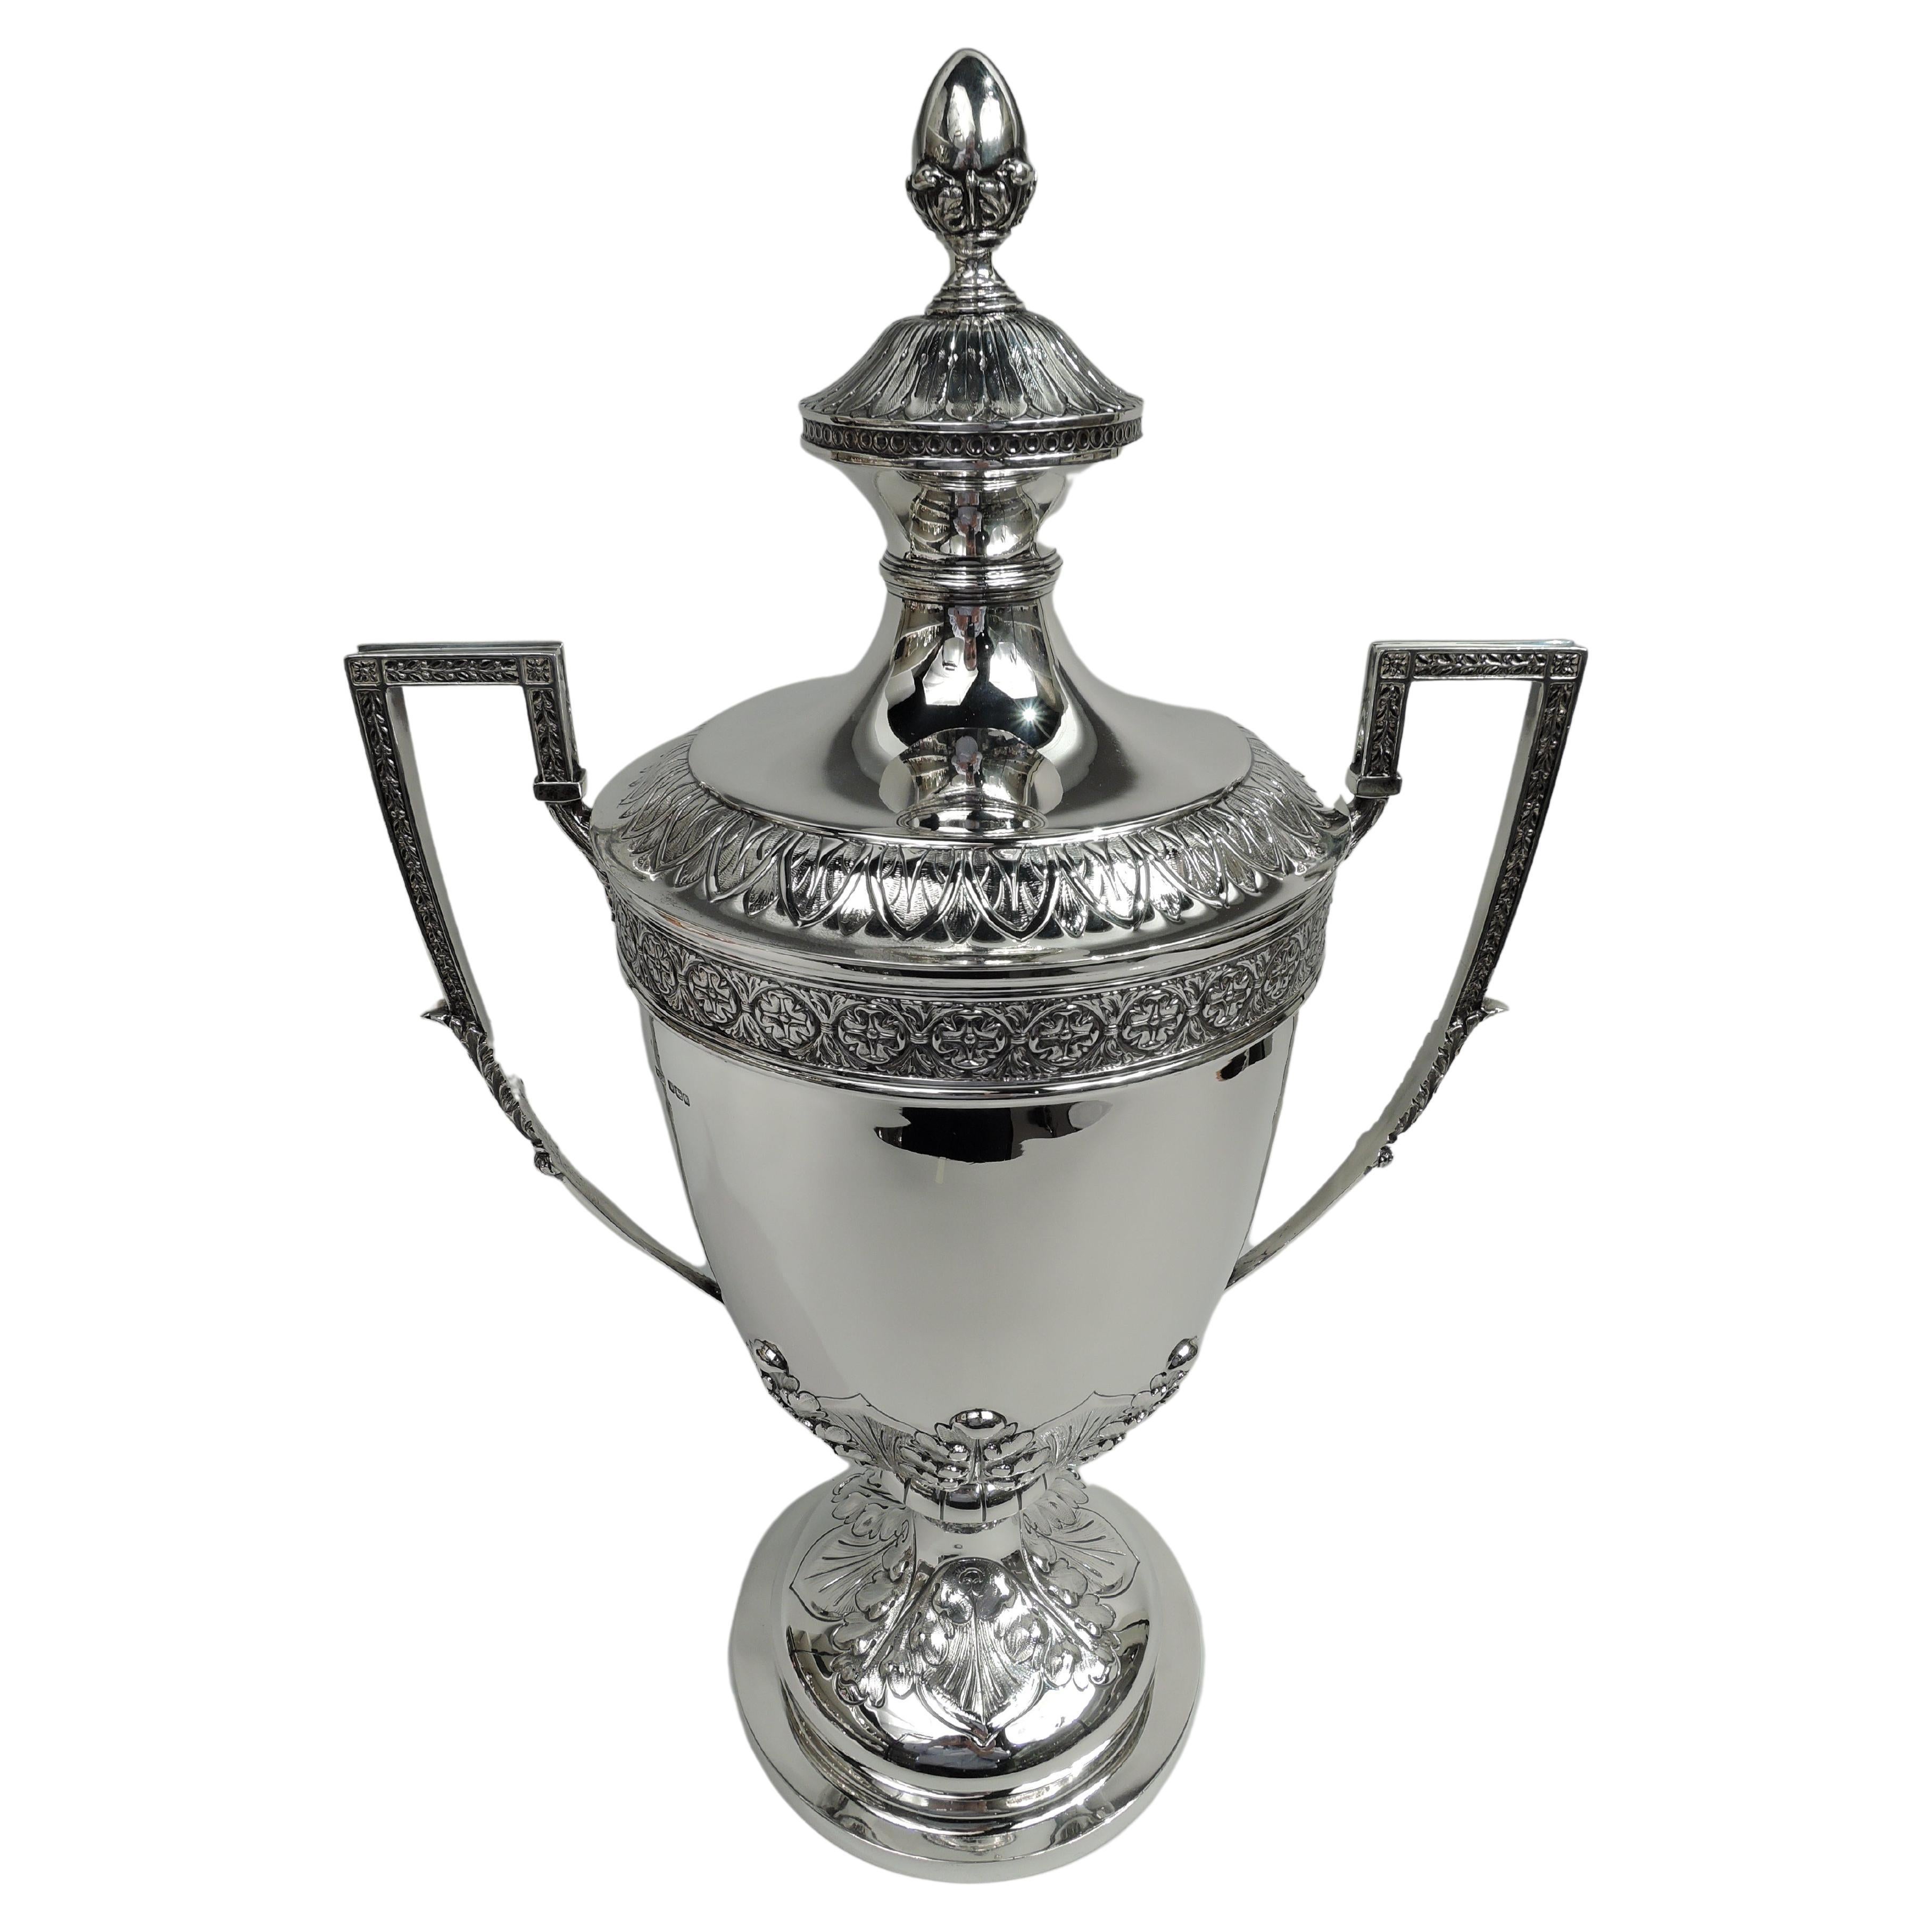 Very Large Market-Fresh English Sterling Silver Covered Urn